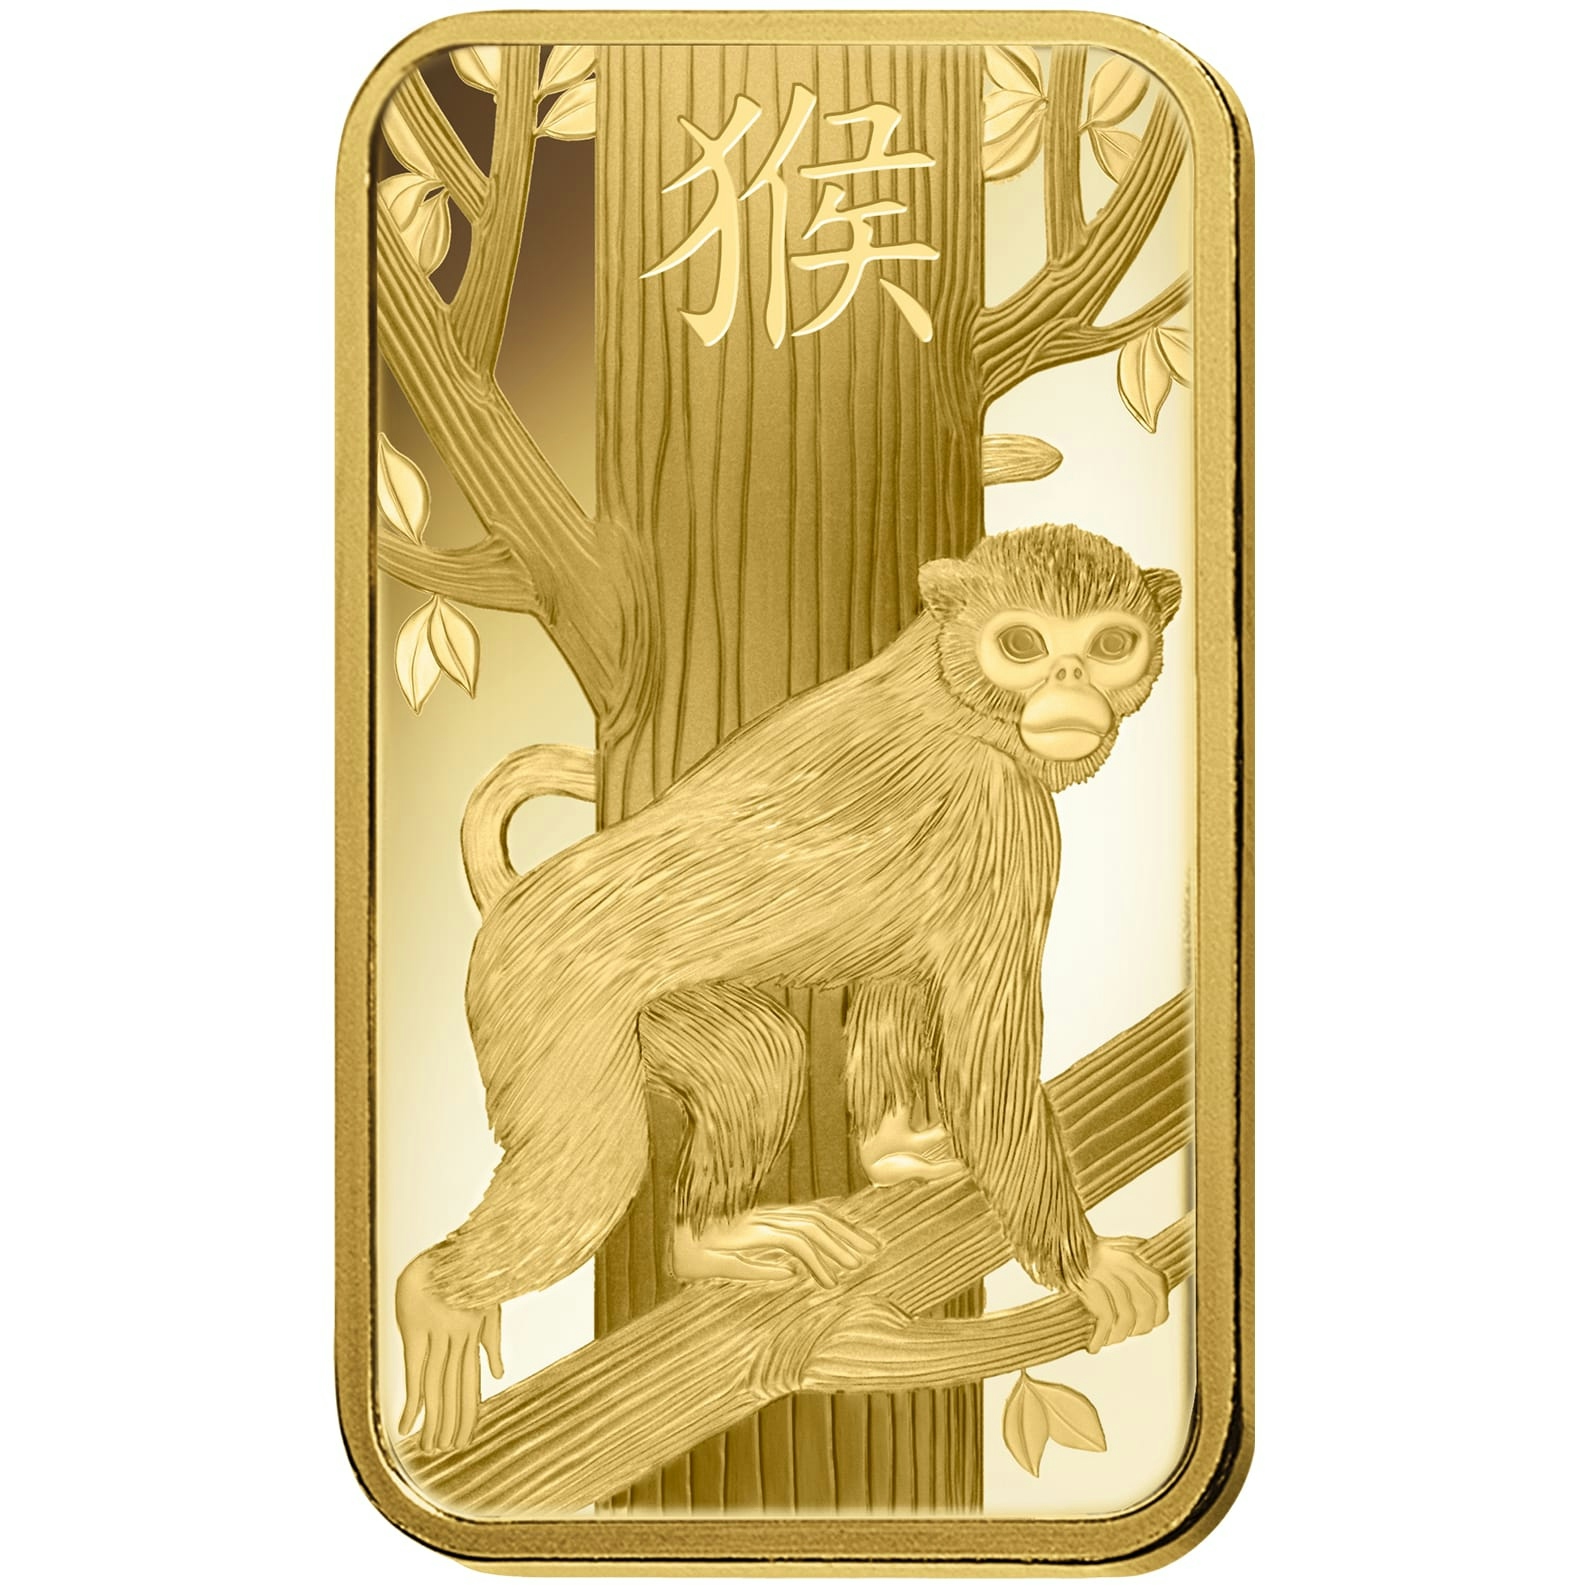 The reverse side of the PAMP Suisse Lunar Monkey gold bar